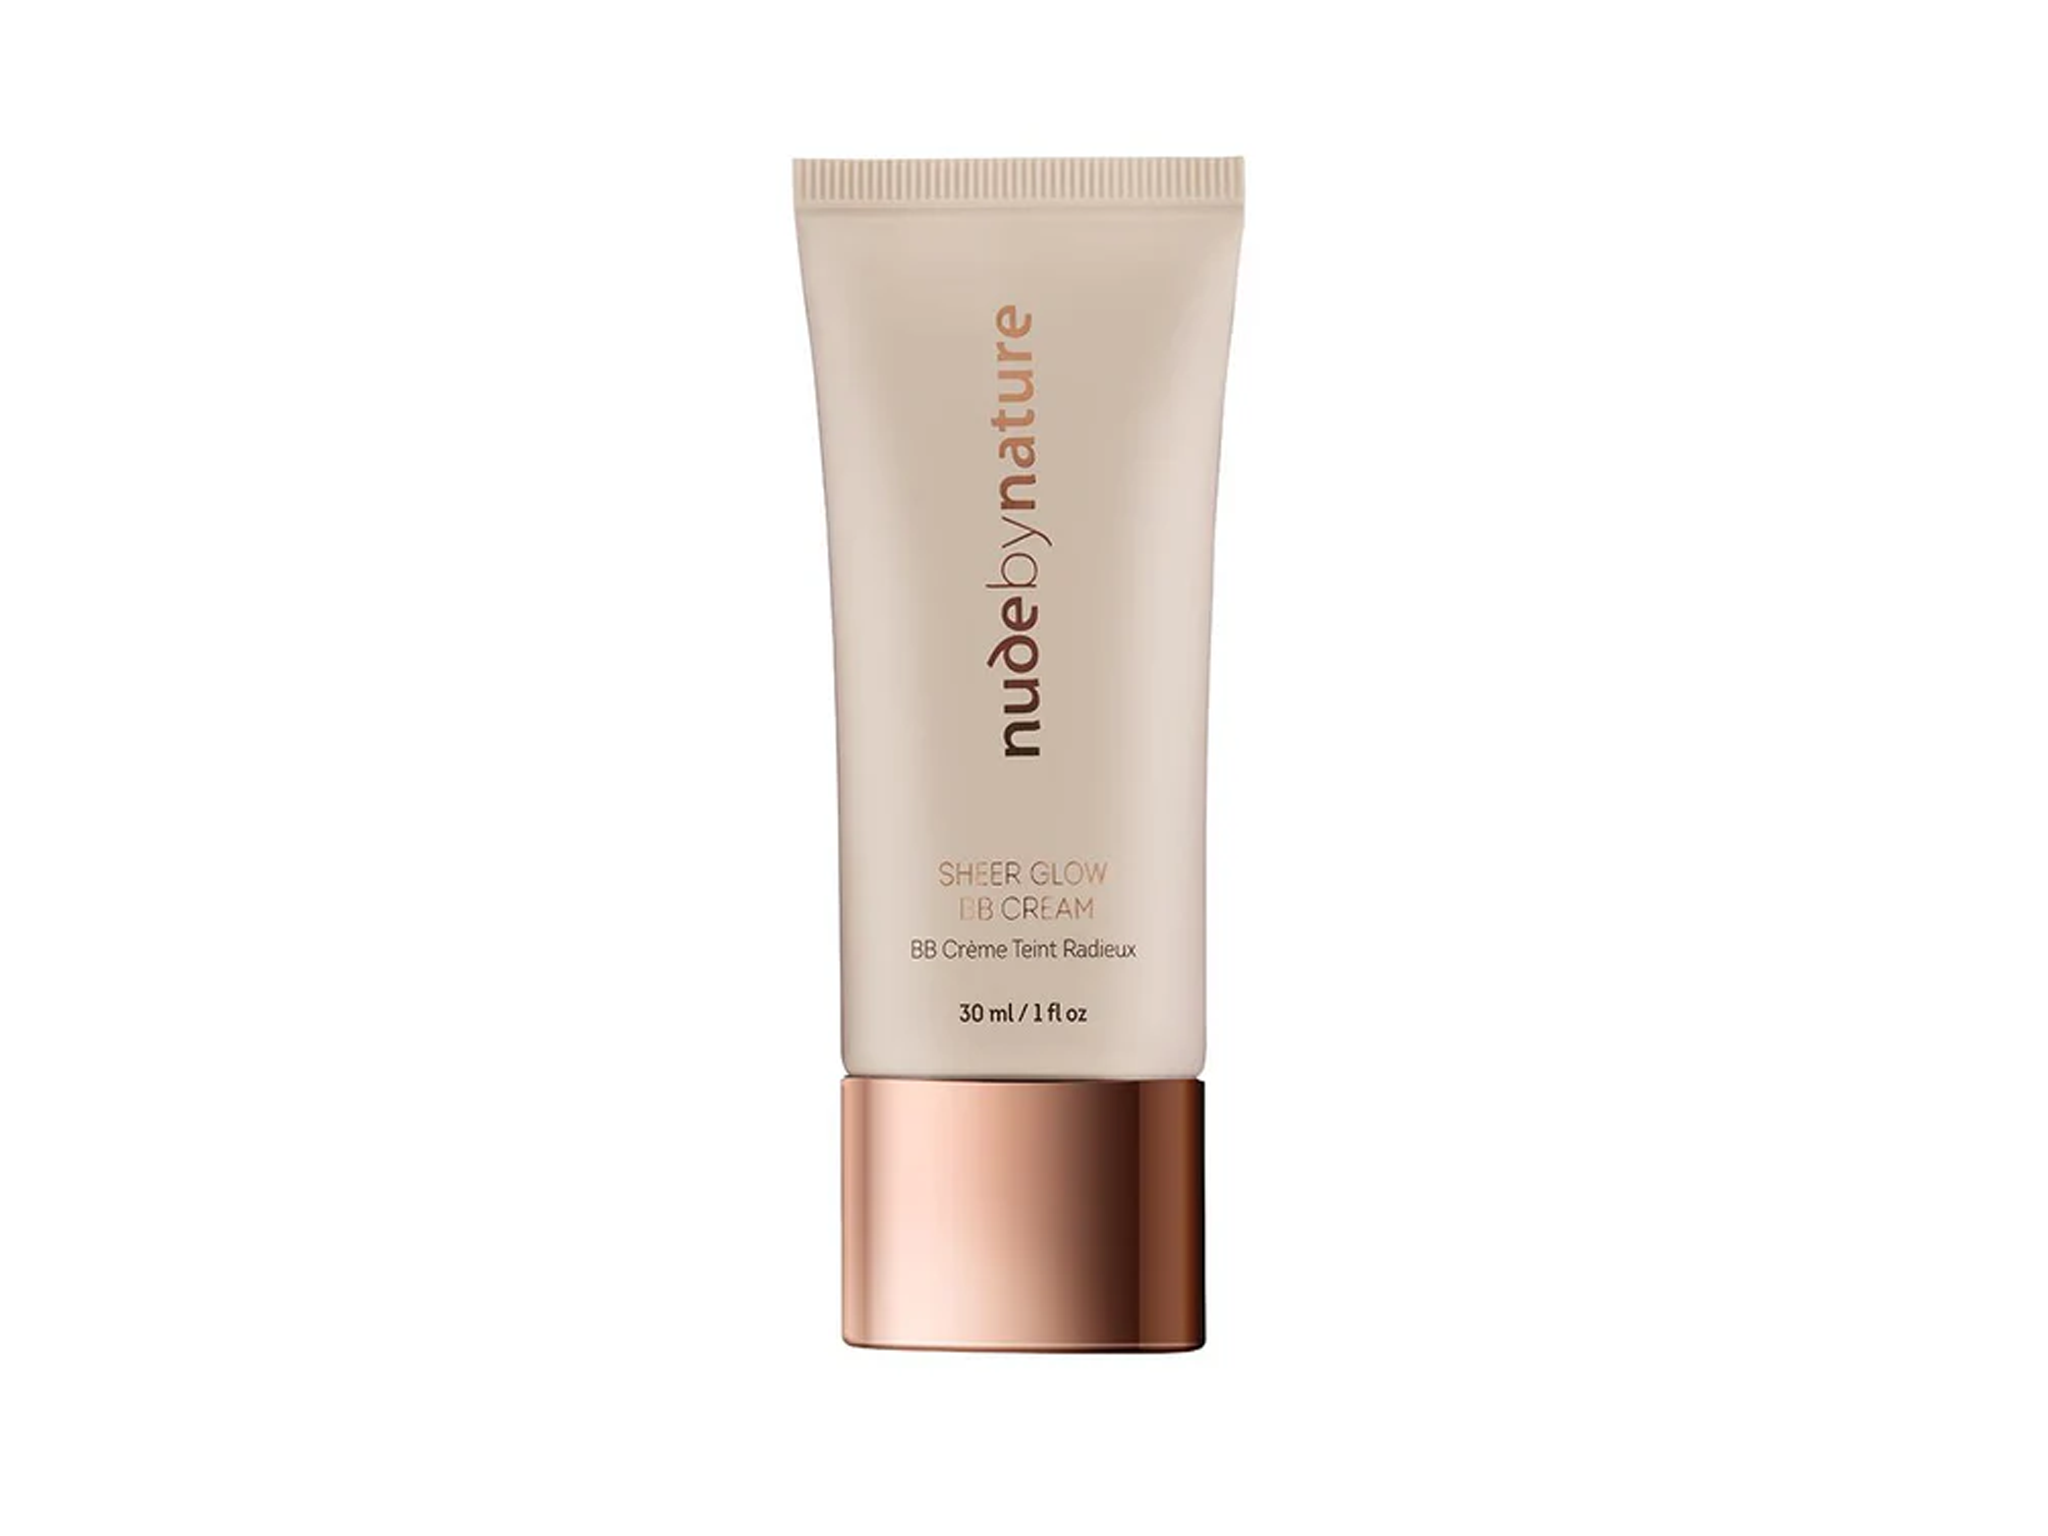 Nude by Nature sheer glow BB cream